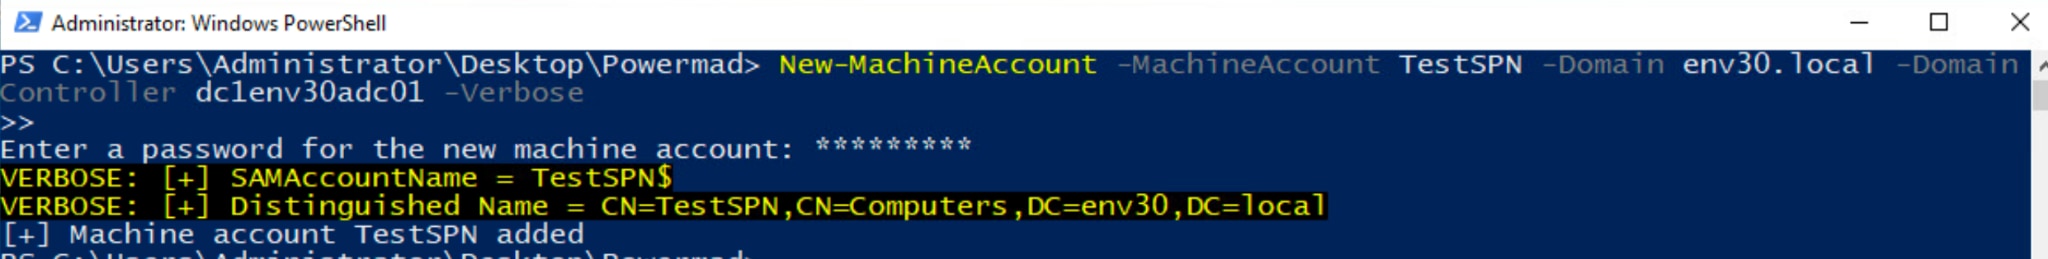 Figure 2. Creating a new computer account in Active Directory (AD)